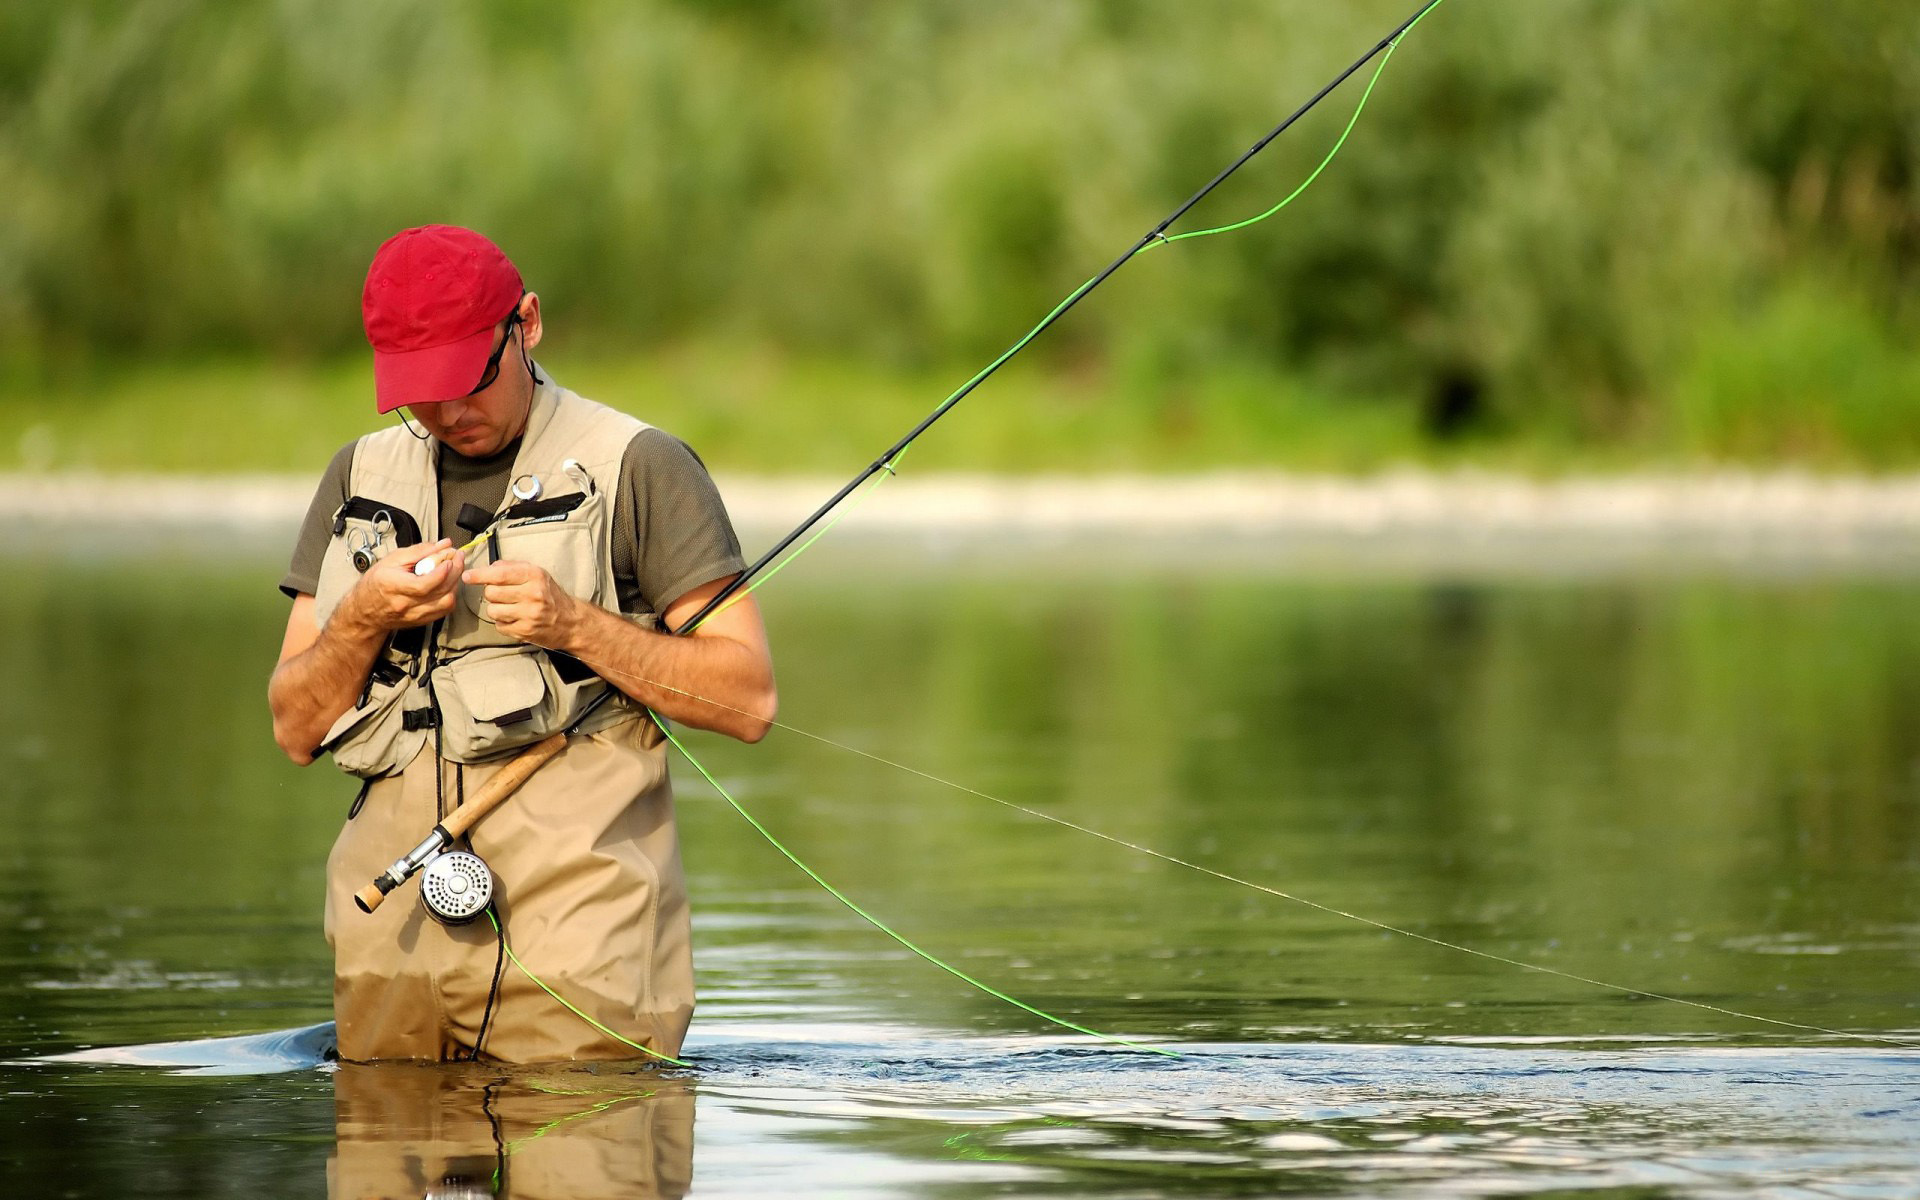 Man Fishing Wallpaper Background Is High Definition You